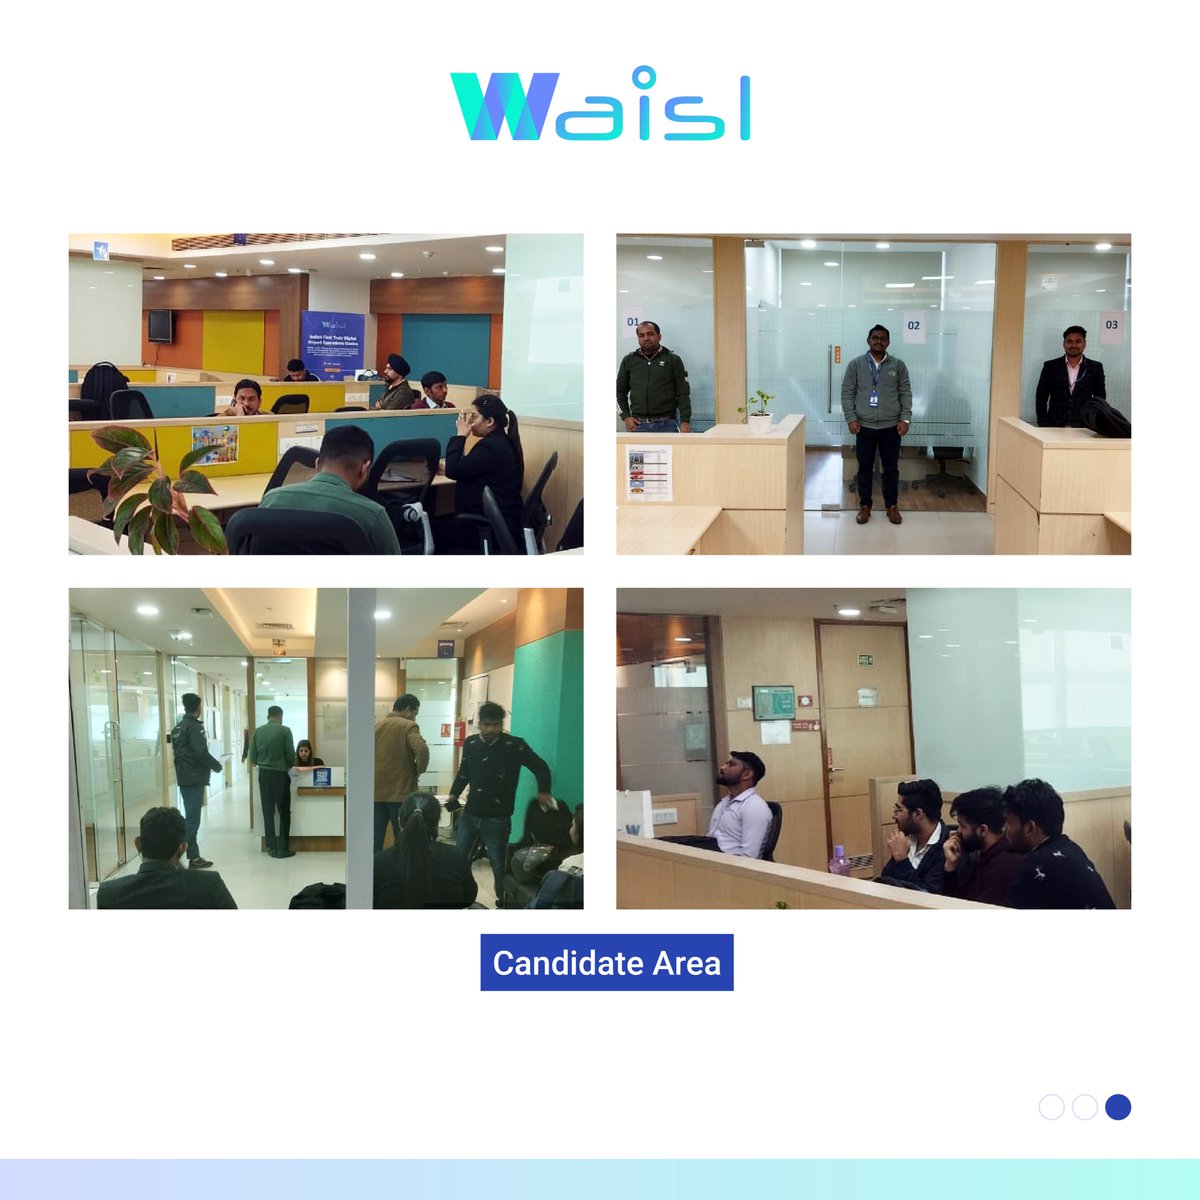 🚀✨ Our two-day #RecruitmentDrive 🔎💼 in Gurugram was a powerhouse of talent and energy! 🌟Words can't describe the dynamic synergy between the hardworking #TeamWAISL 👥and the incredible candidates who joined us on this exciting journey. 🤝But pictures can. So here you go!